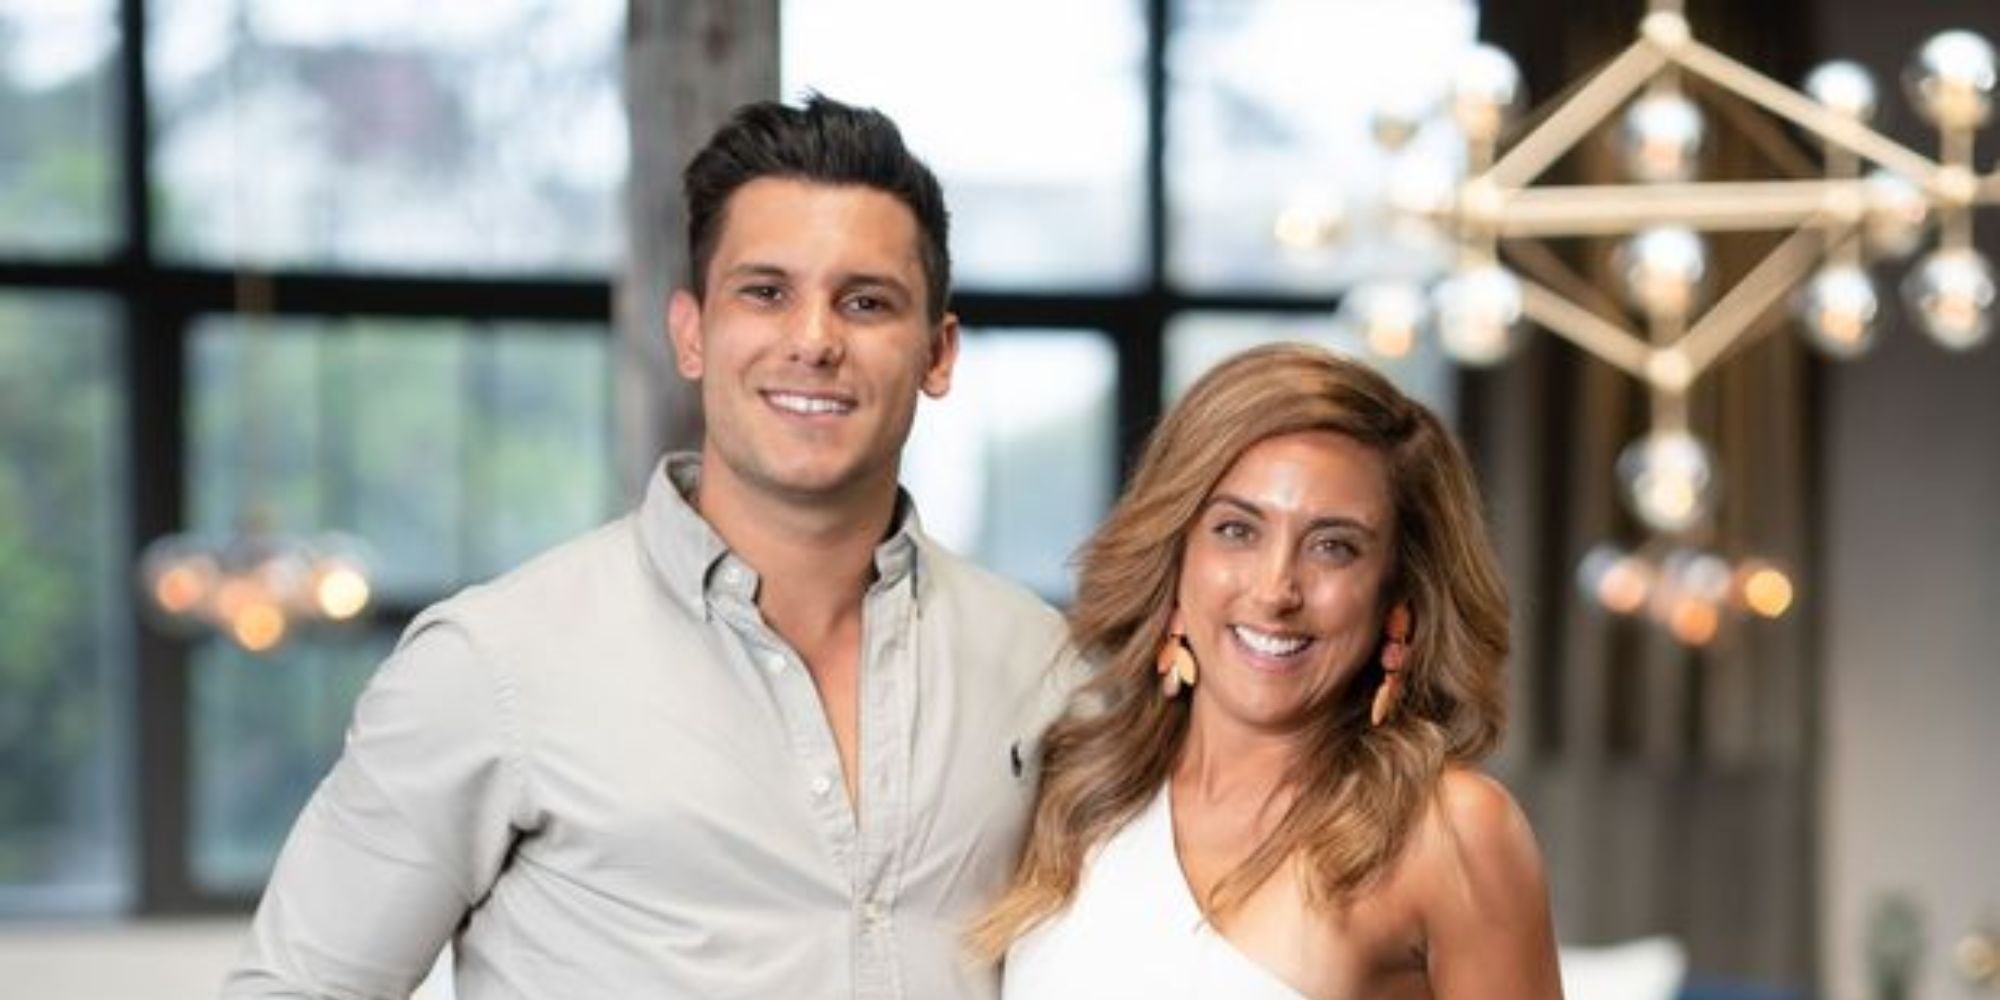 Married At First Sight Australia's Kerry and Johnny smile